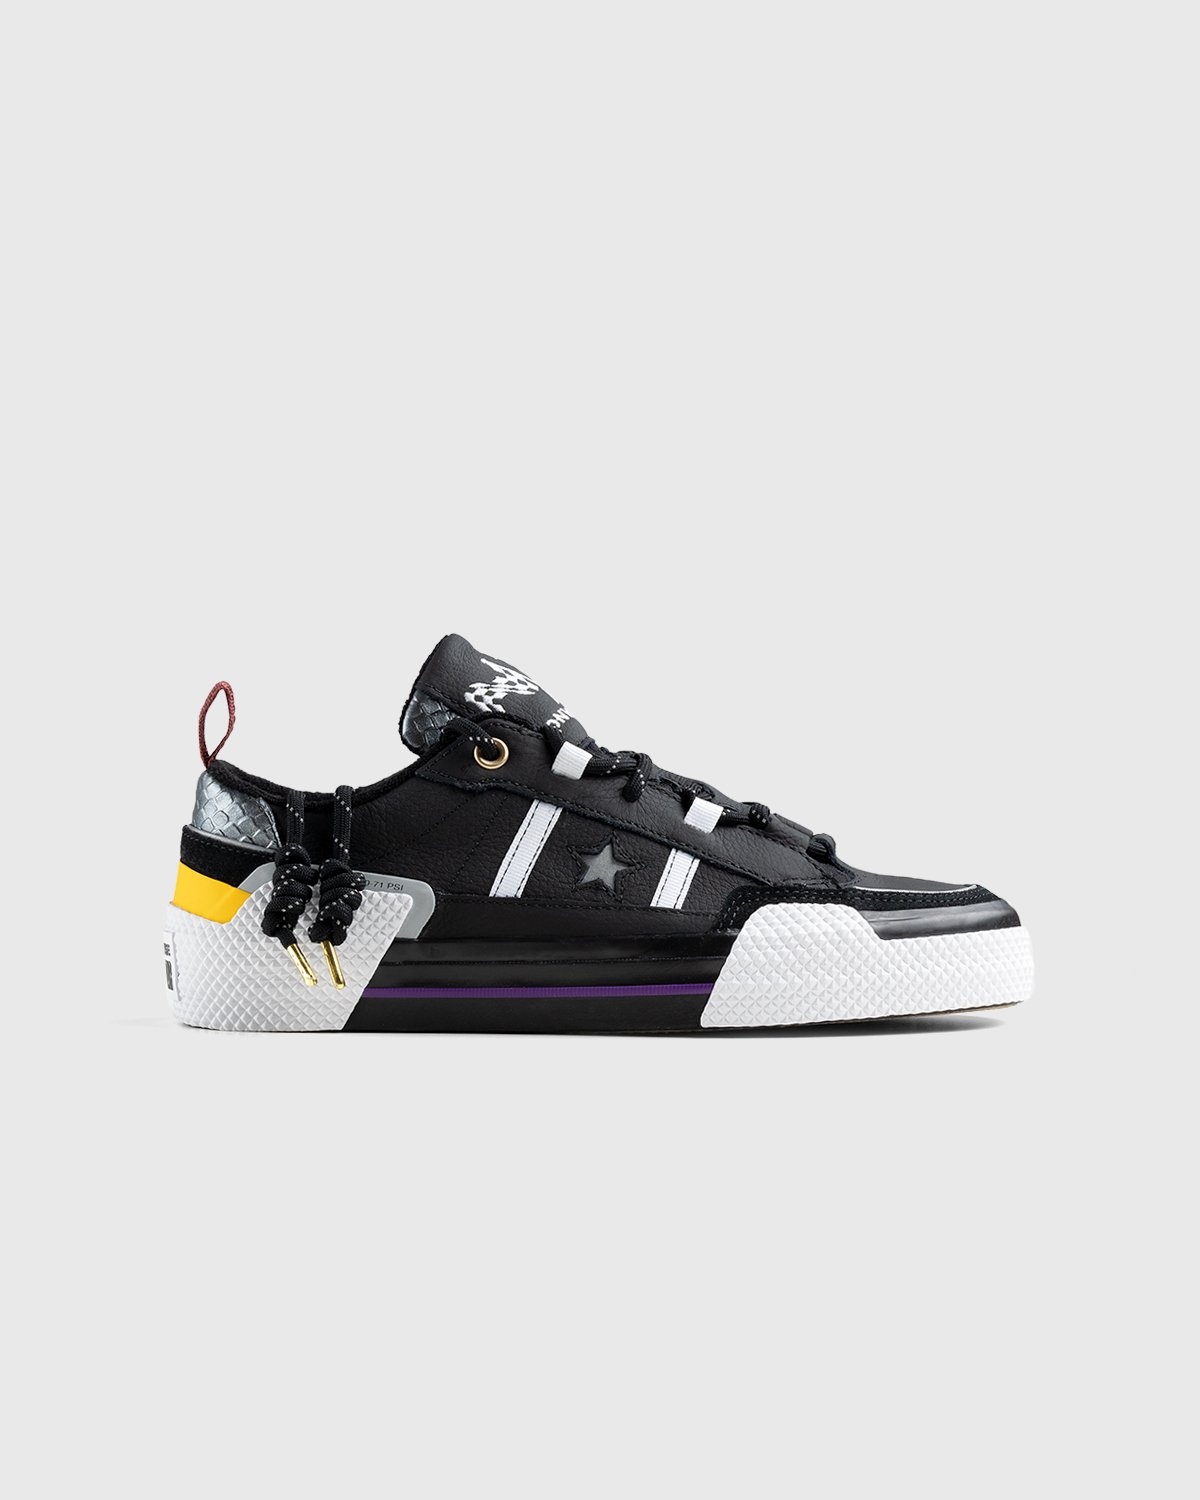 Converse x IBN Japser – One Star Ox Black/White/Spectra Yellow - Sneakers - Black - Image 1